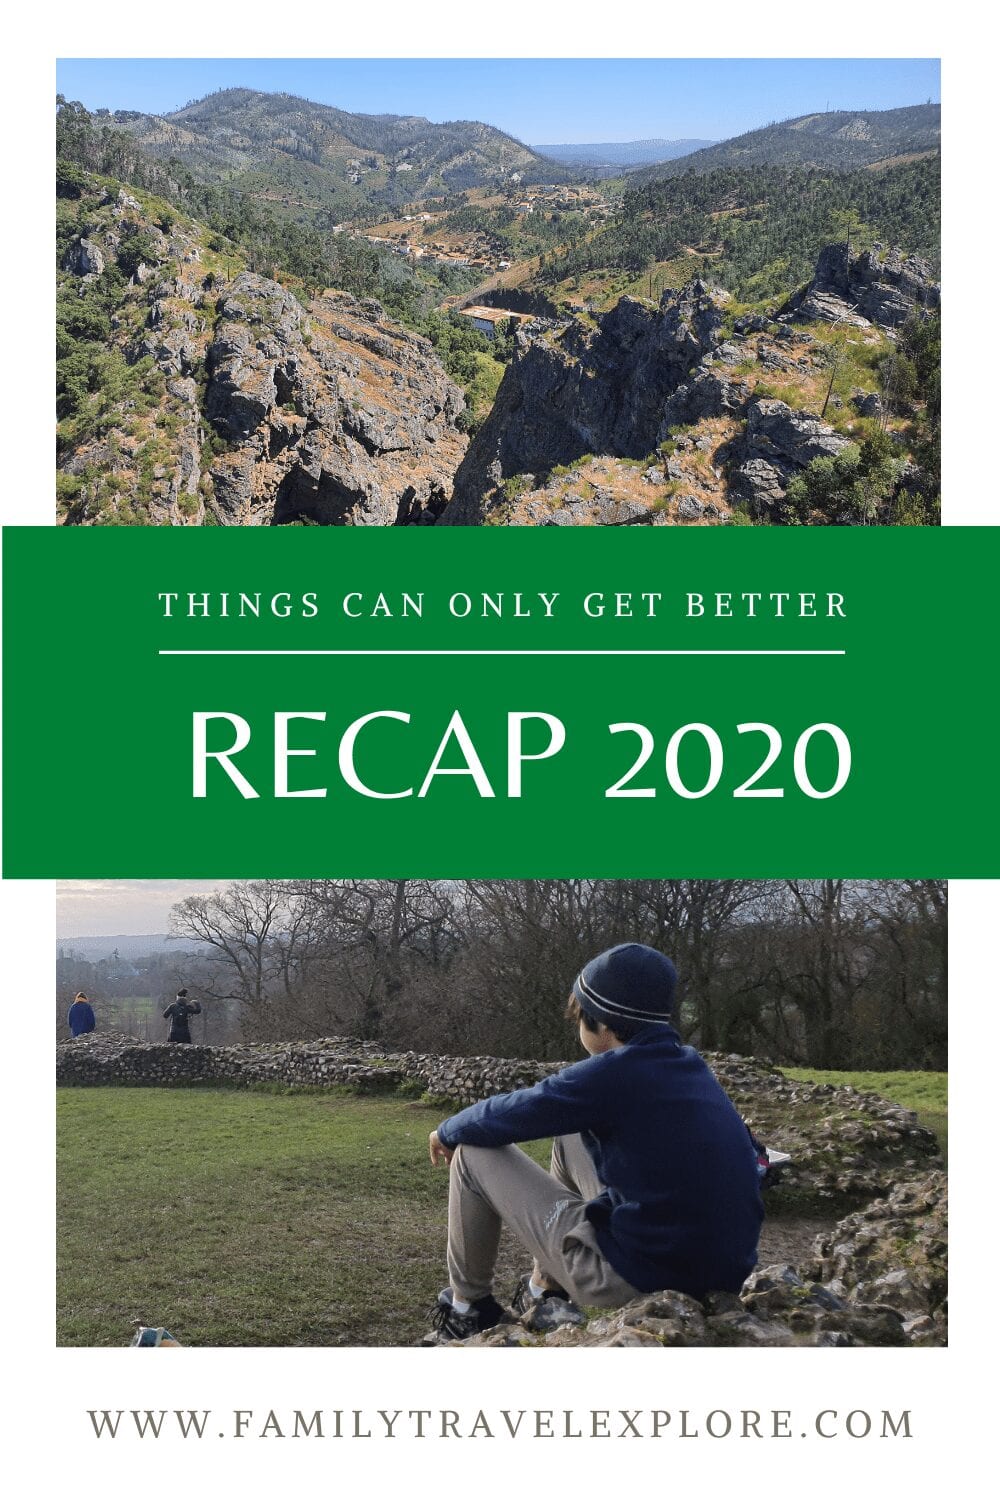 Recap 2020 - Things Can Only Get Better